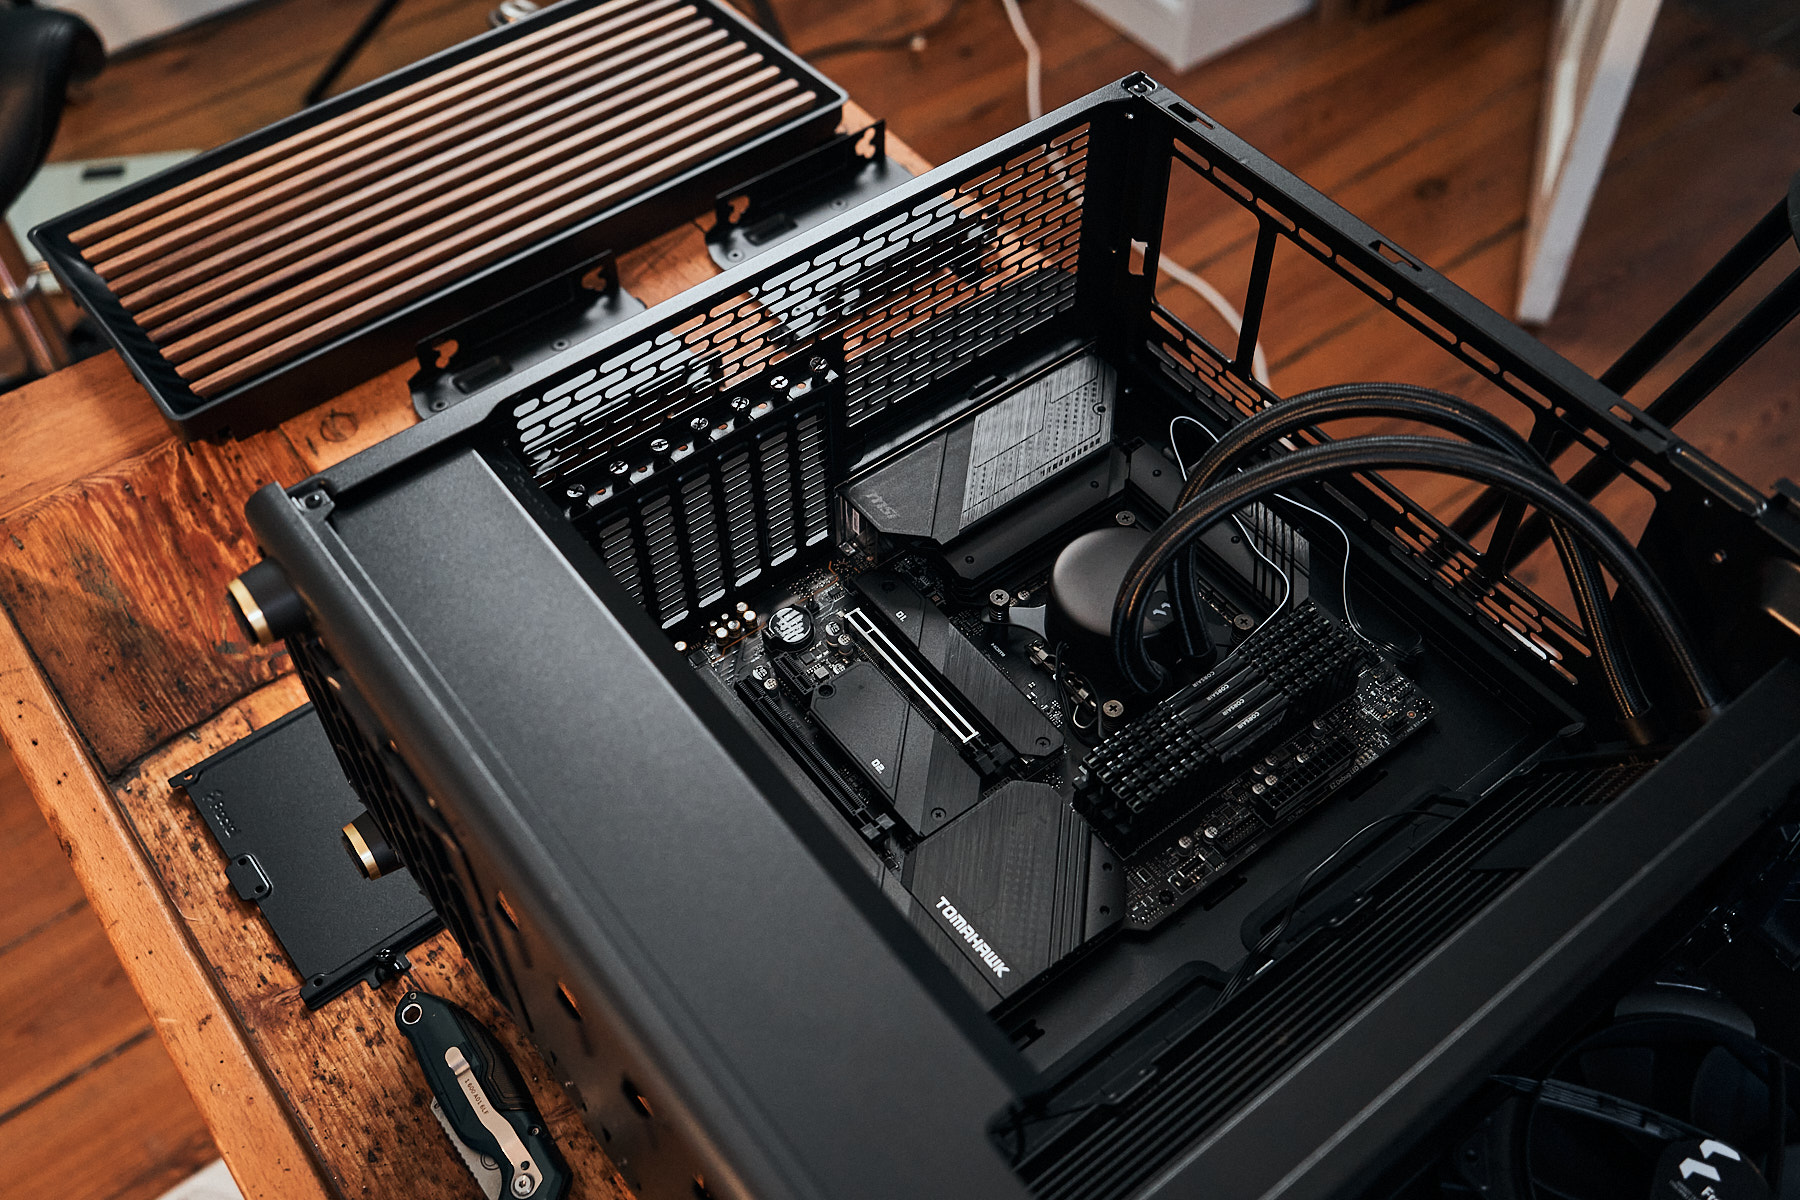 Fractal Design North hands-on: The PC case with Wife Approval factor -   Reviews